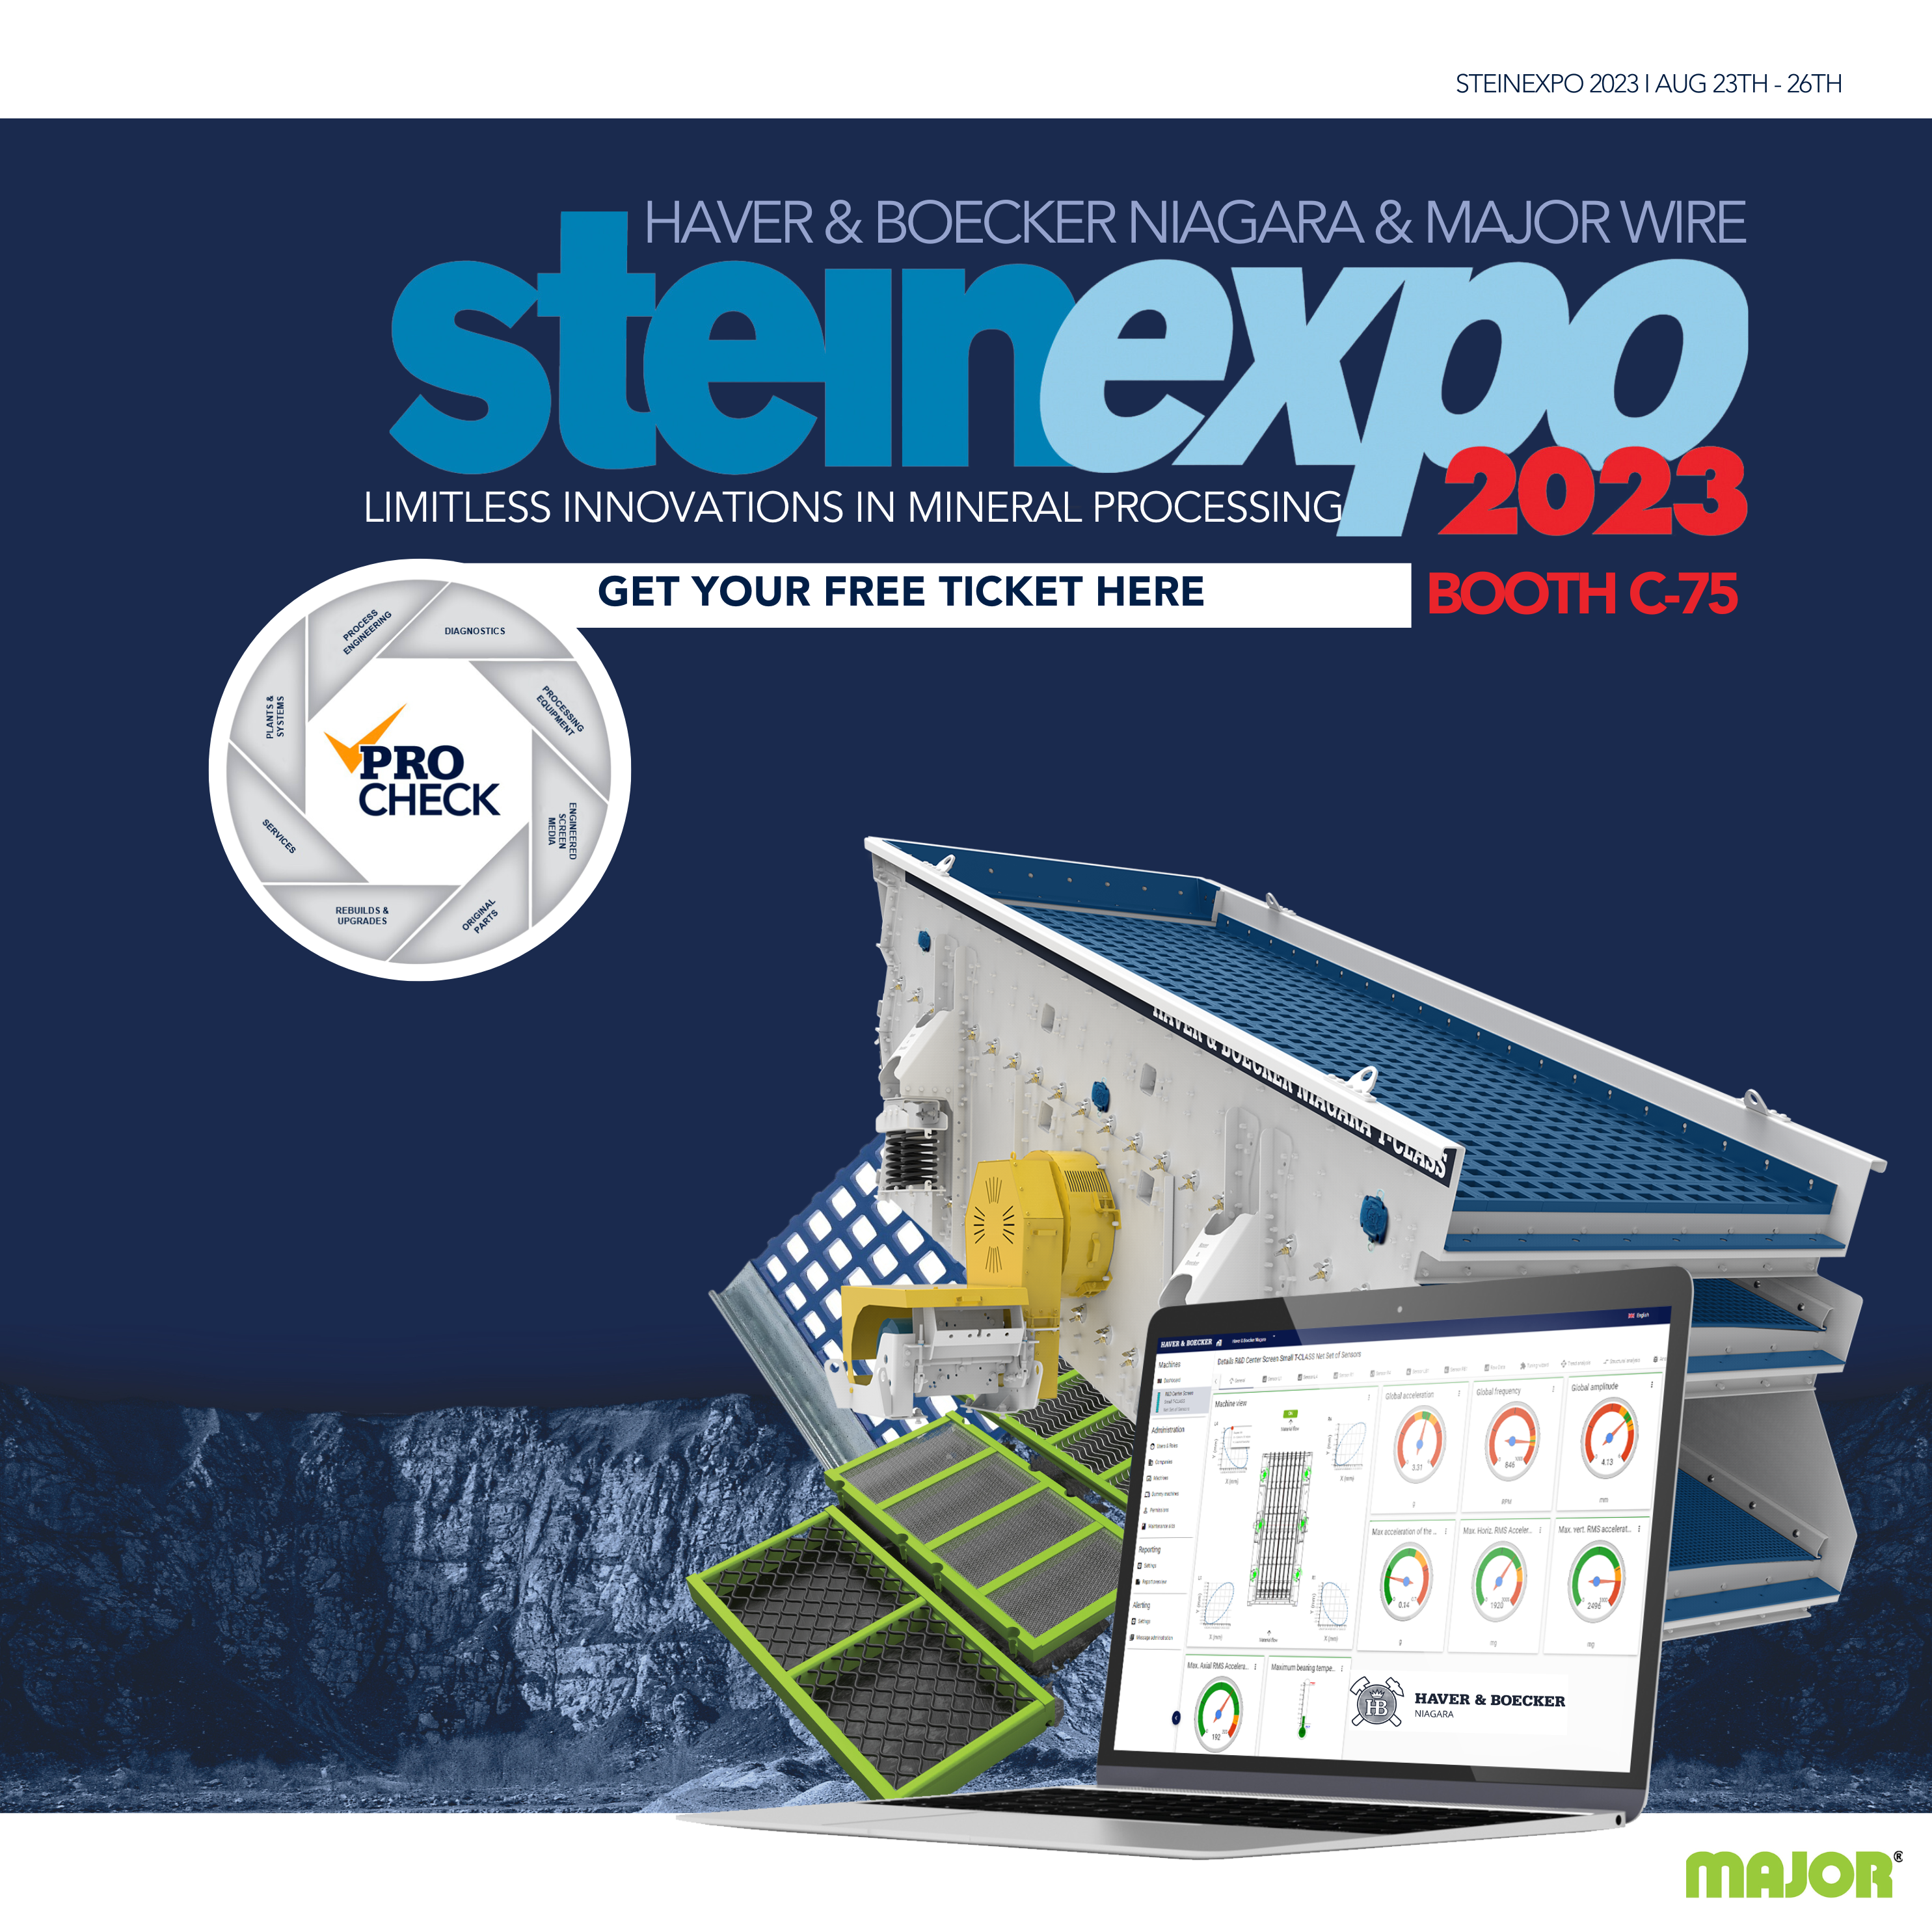 Haver & Boecker Niagara Joins Steinexpo 2023, Booth C-75: Unveiling Limitless Innovations In Processing Technology